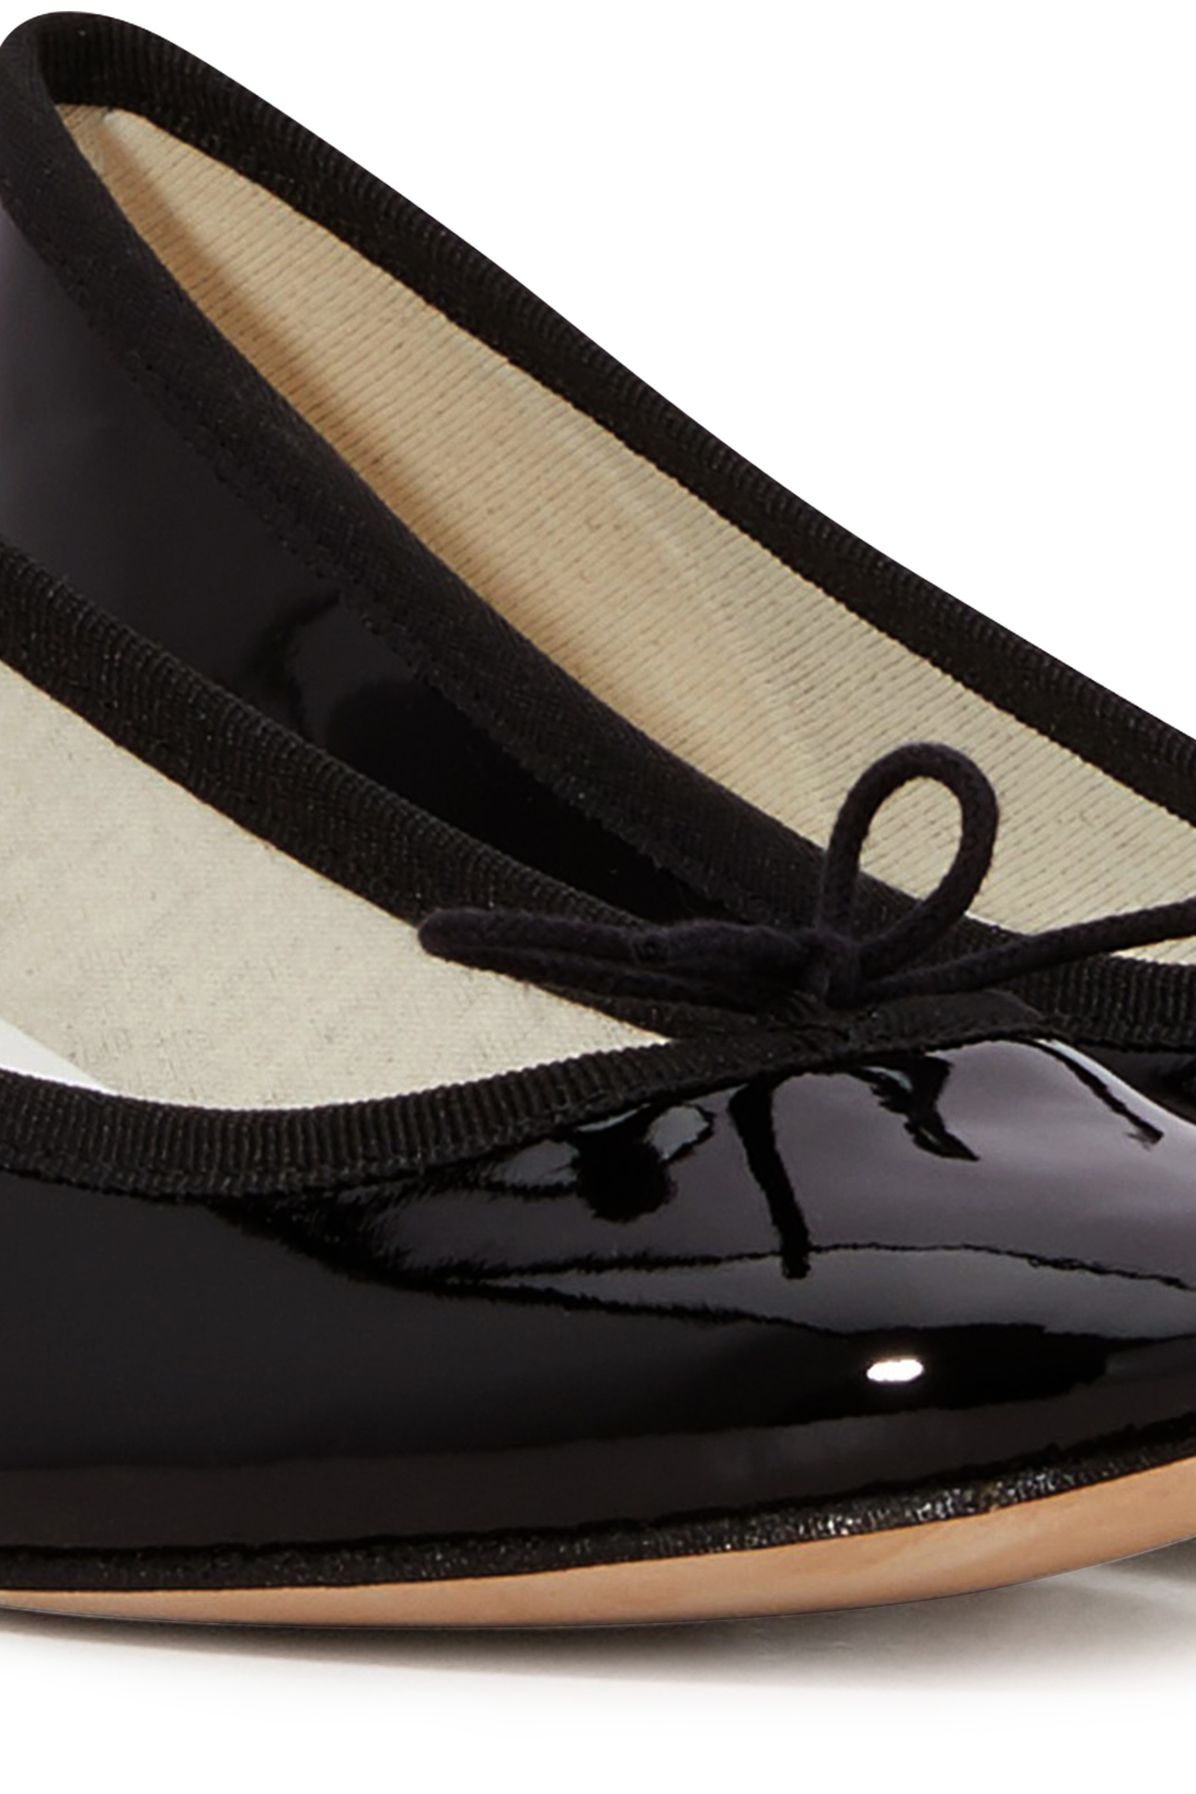 repetto Camille ballet flats with leather sole